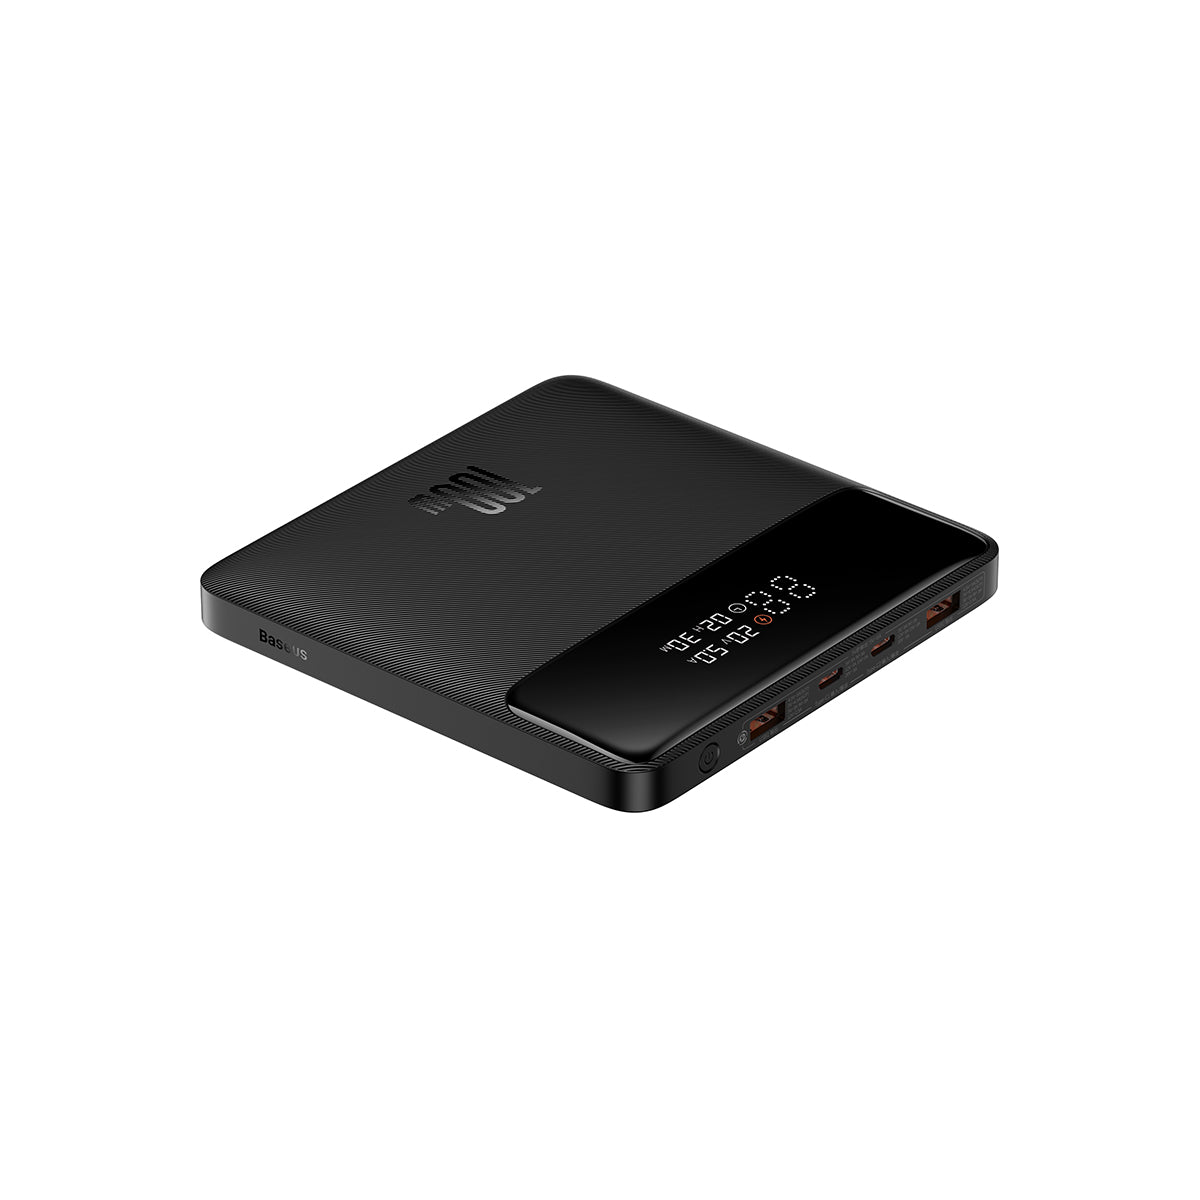 Baseus Blade2 Smart Power Bank upgrades to 140W charging and new